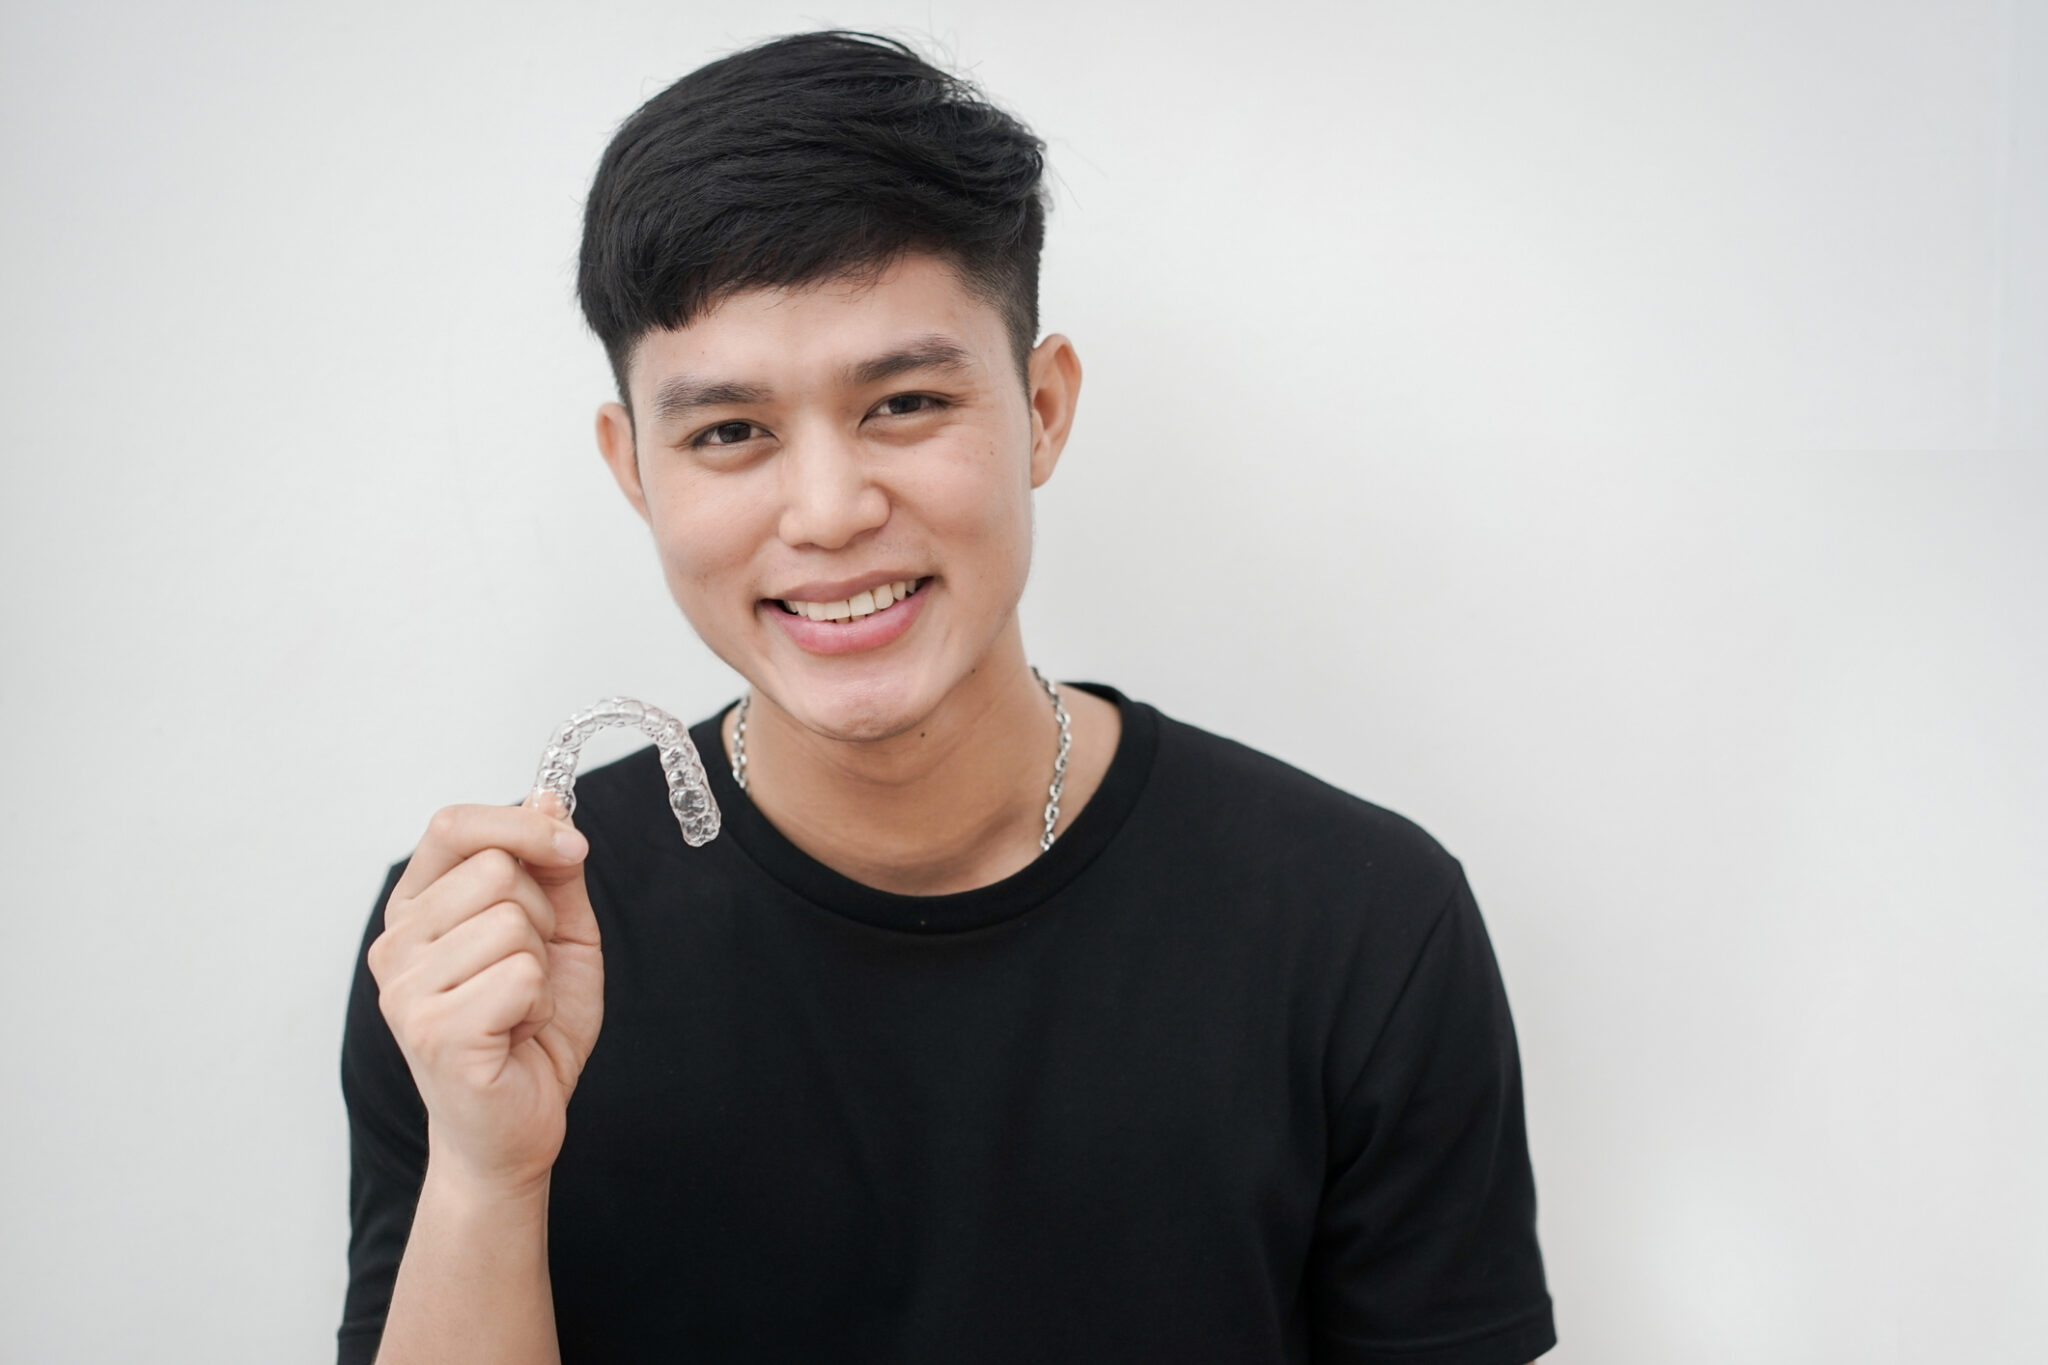 A young man holding a pair of clear aligner trays for teeth whitening treatment.